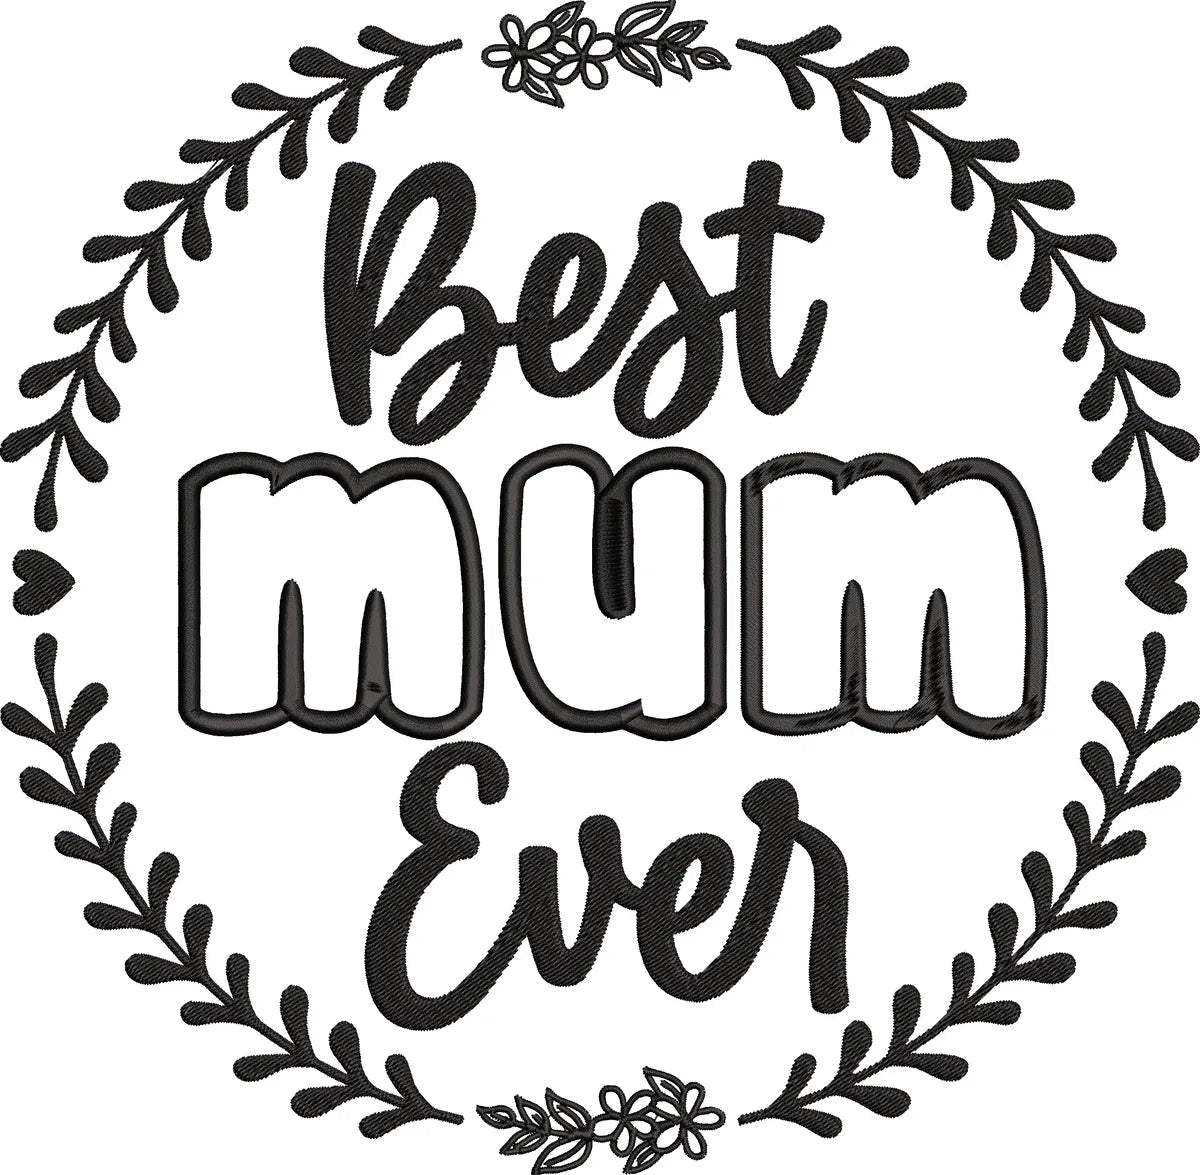 Best-mum-ever- -Mothers- (1)- Embroidery Design FineryEmbroidery